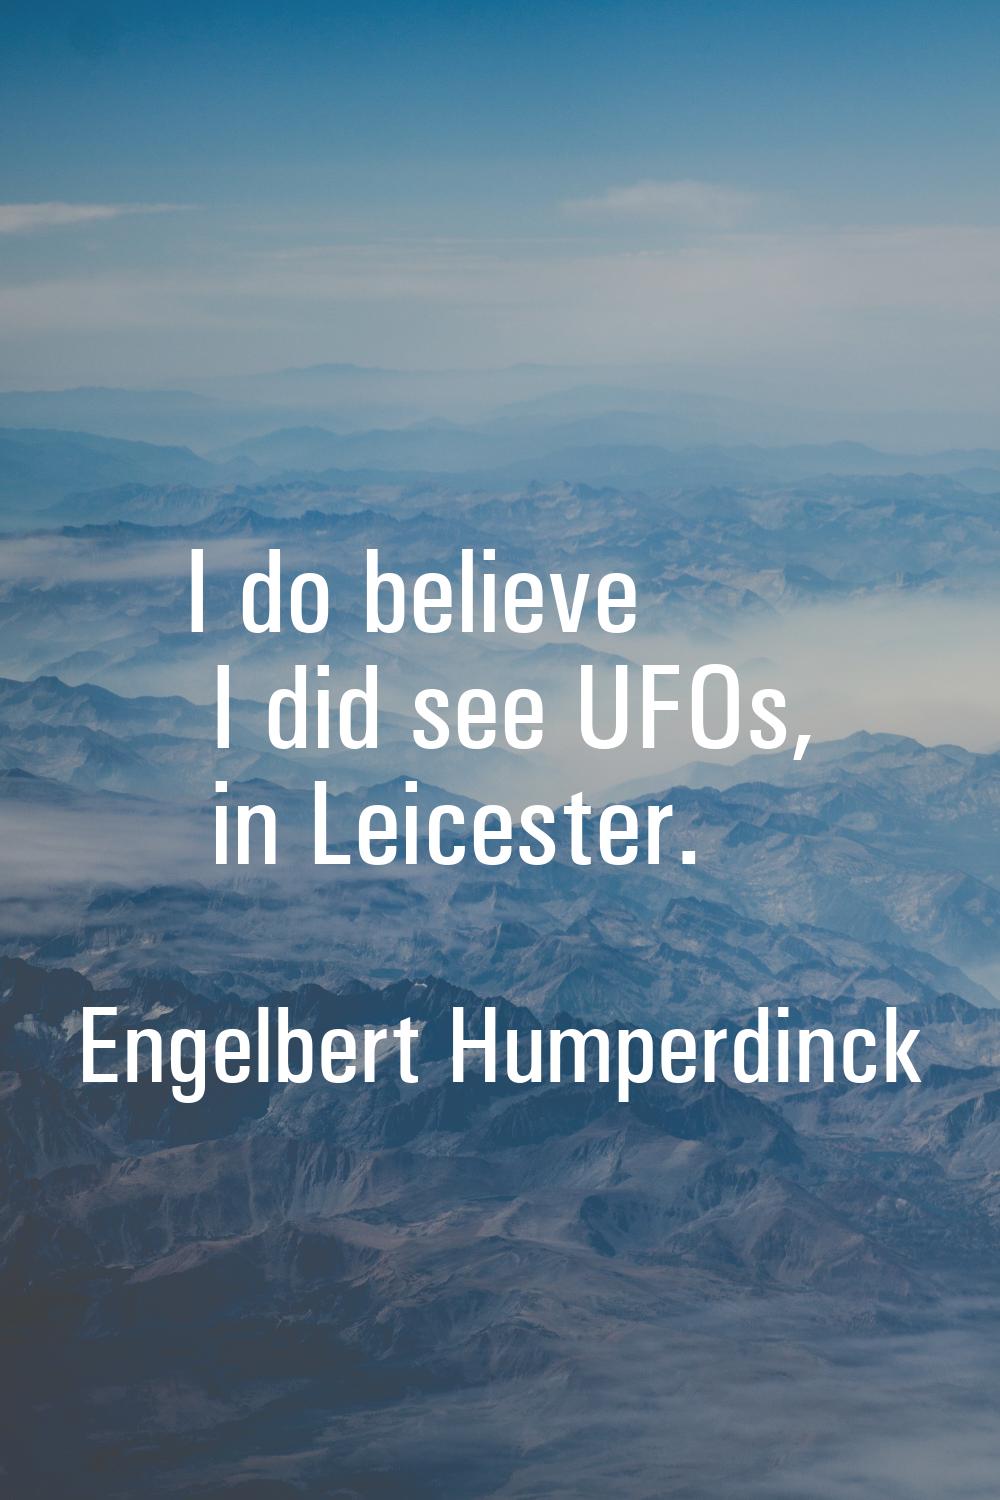 I do believe I did see UFOs, in Leicester.